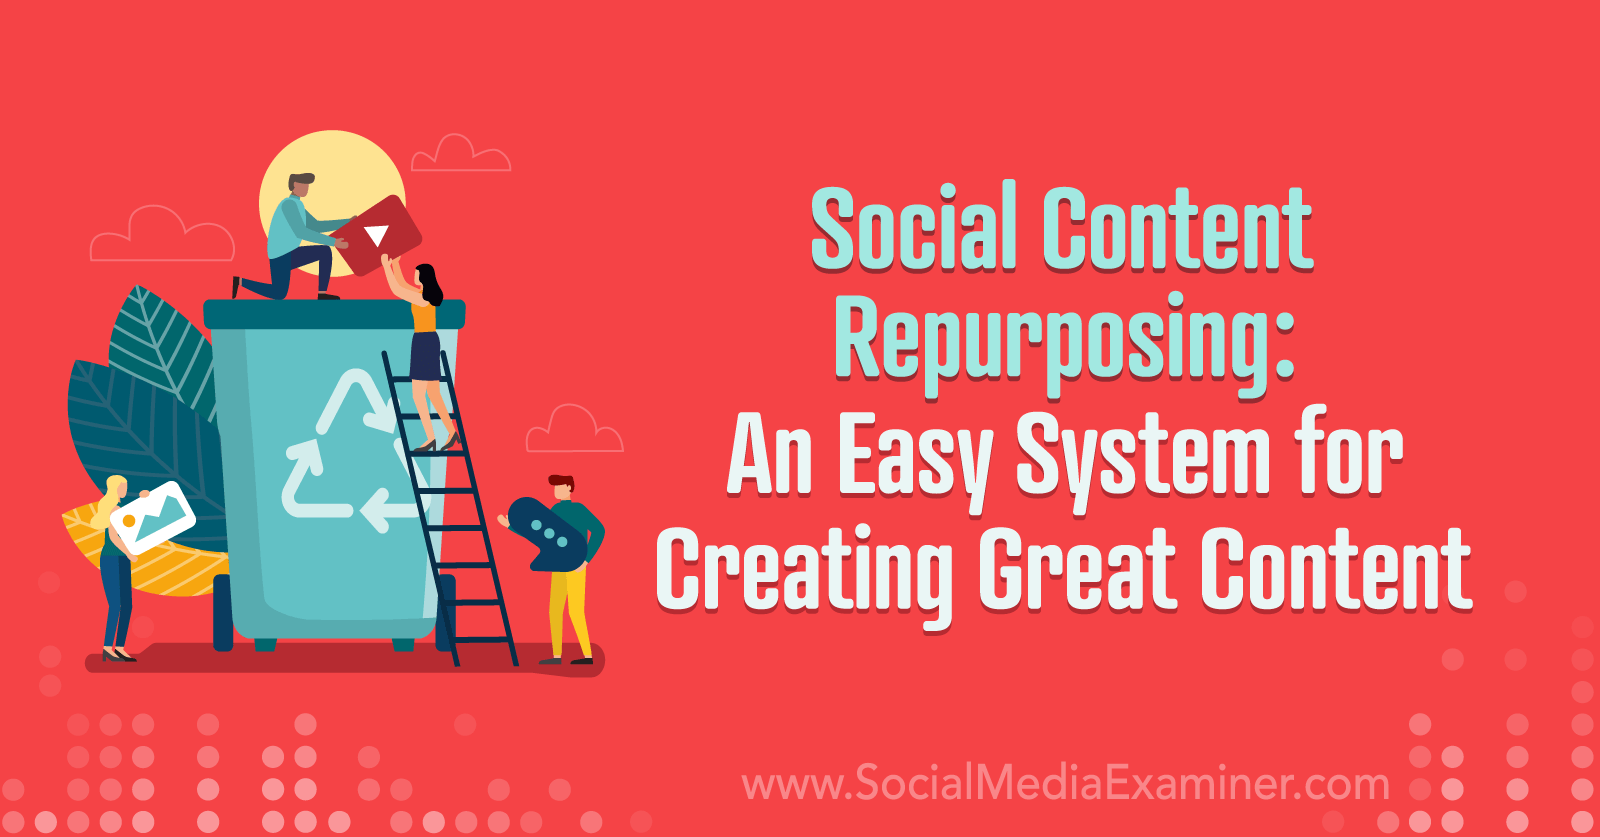 Social Content Repurposing: An Easy System for Creating Great Content by Social Media Examiner